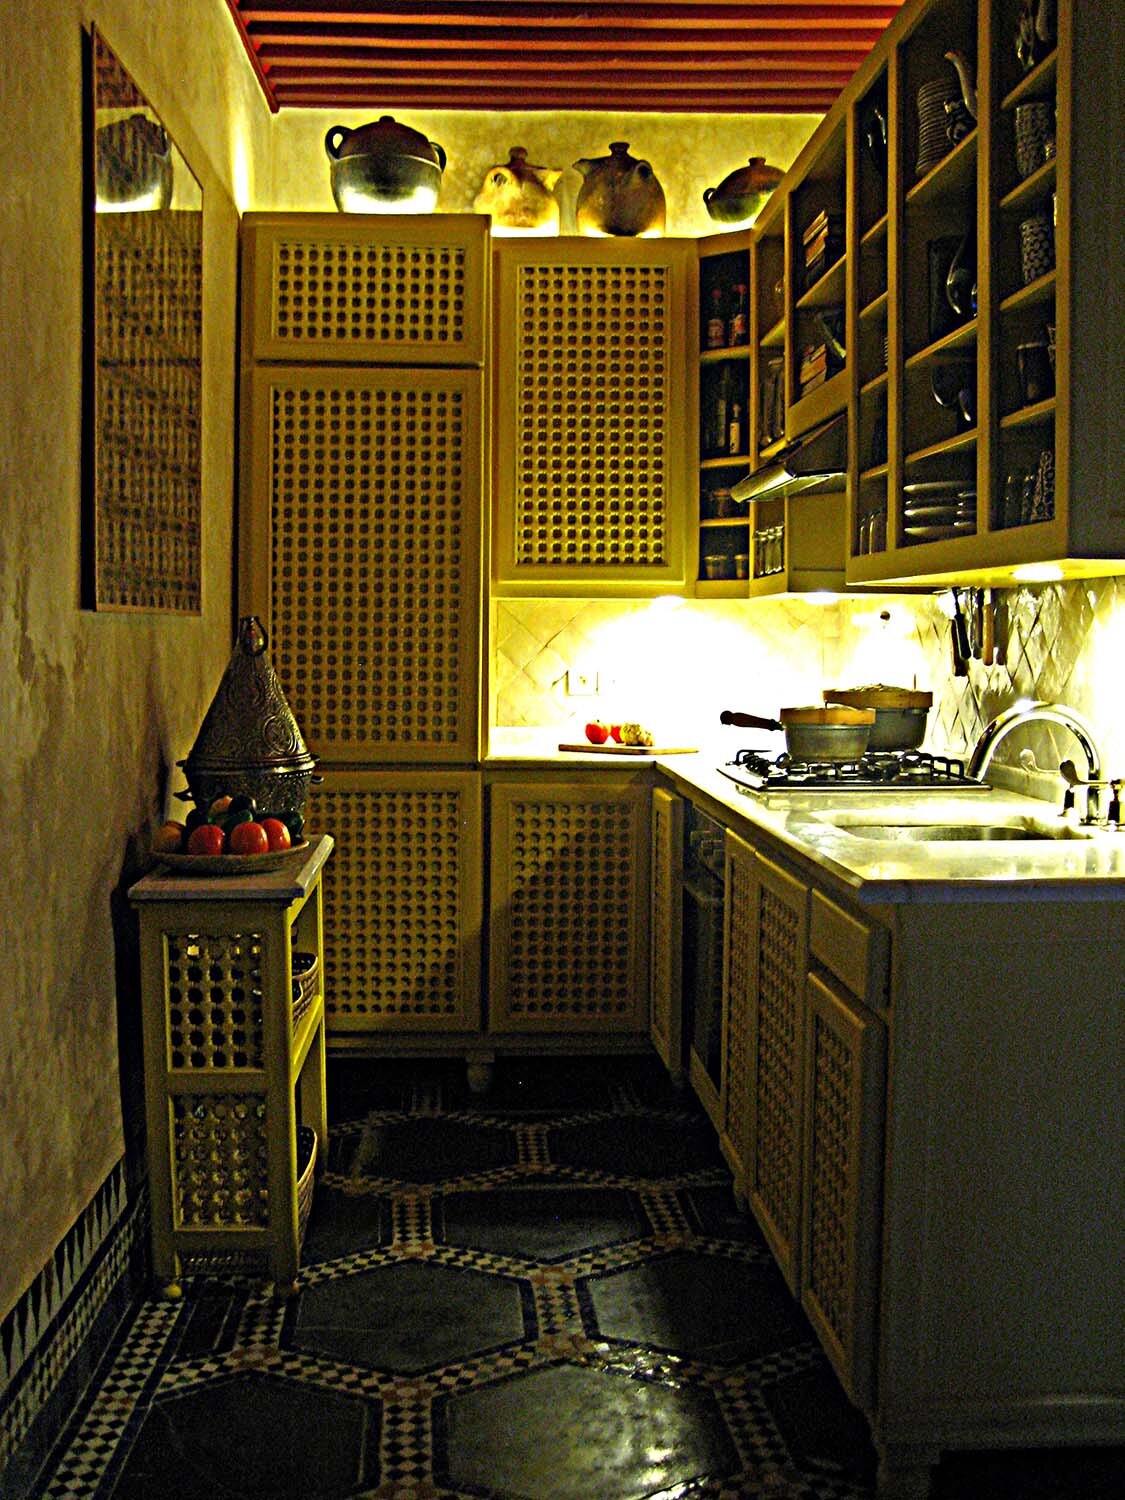  Bespoke custom-made kitchen hand-made by Moroccan craftsmen using artisanal techniques and real cedar wood 